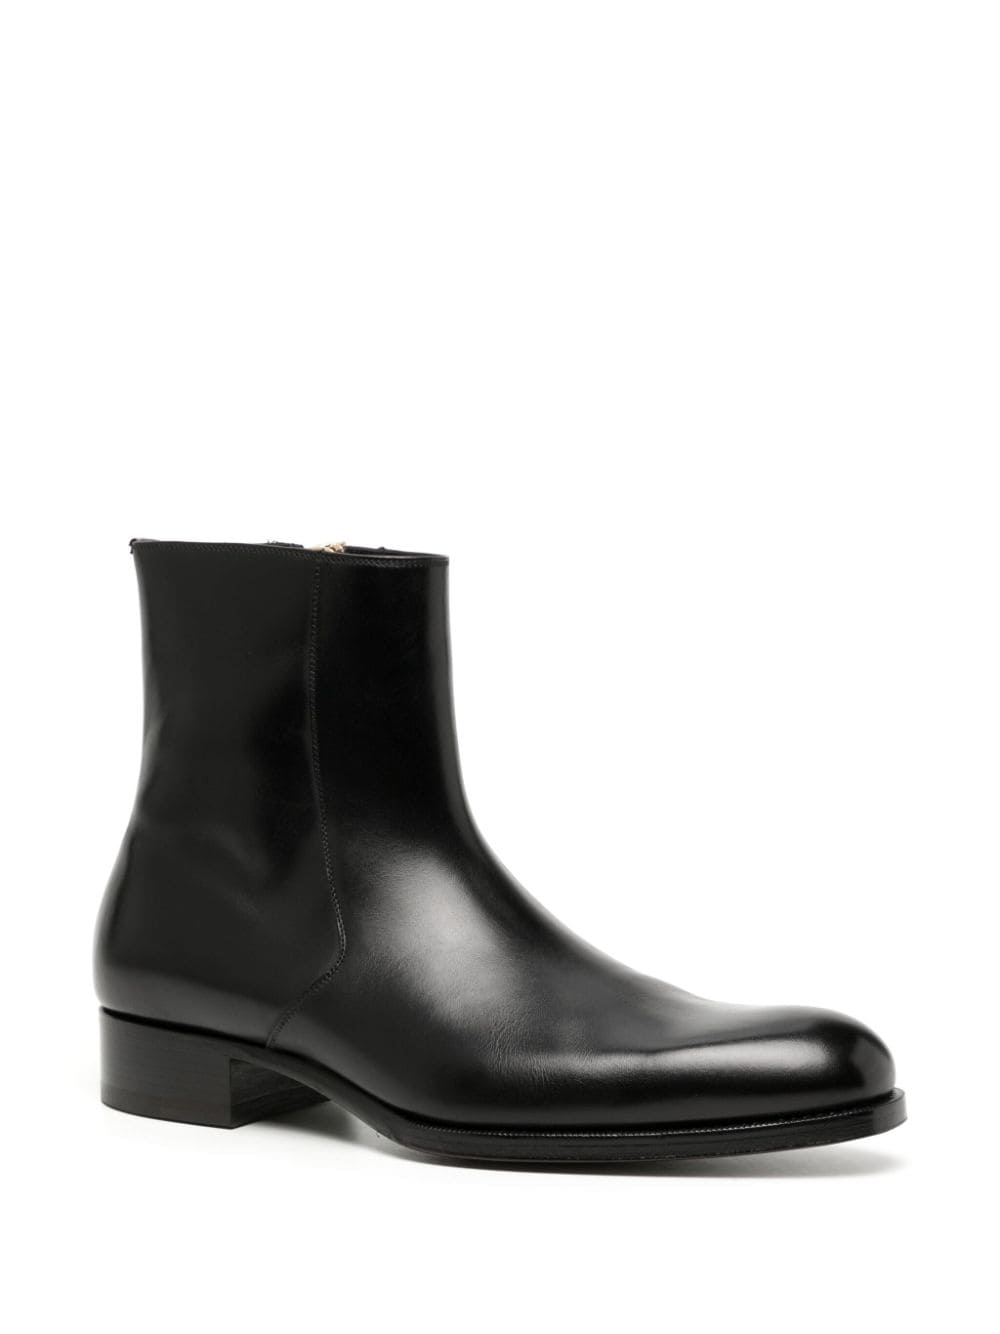 TOM FORD Edgar leather ankle boots - Zwart